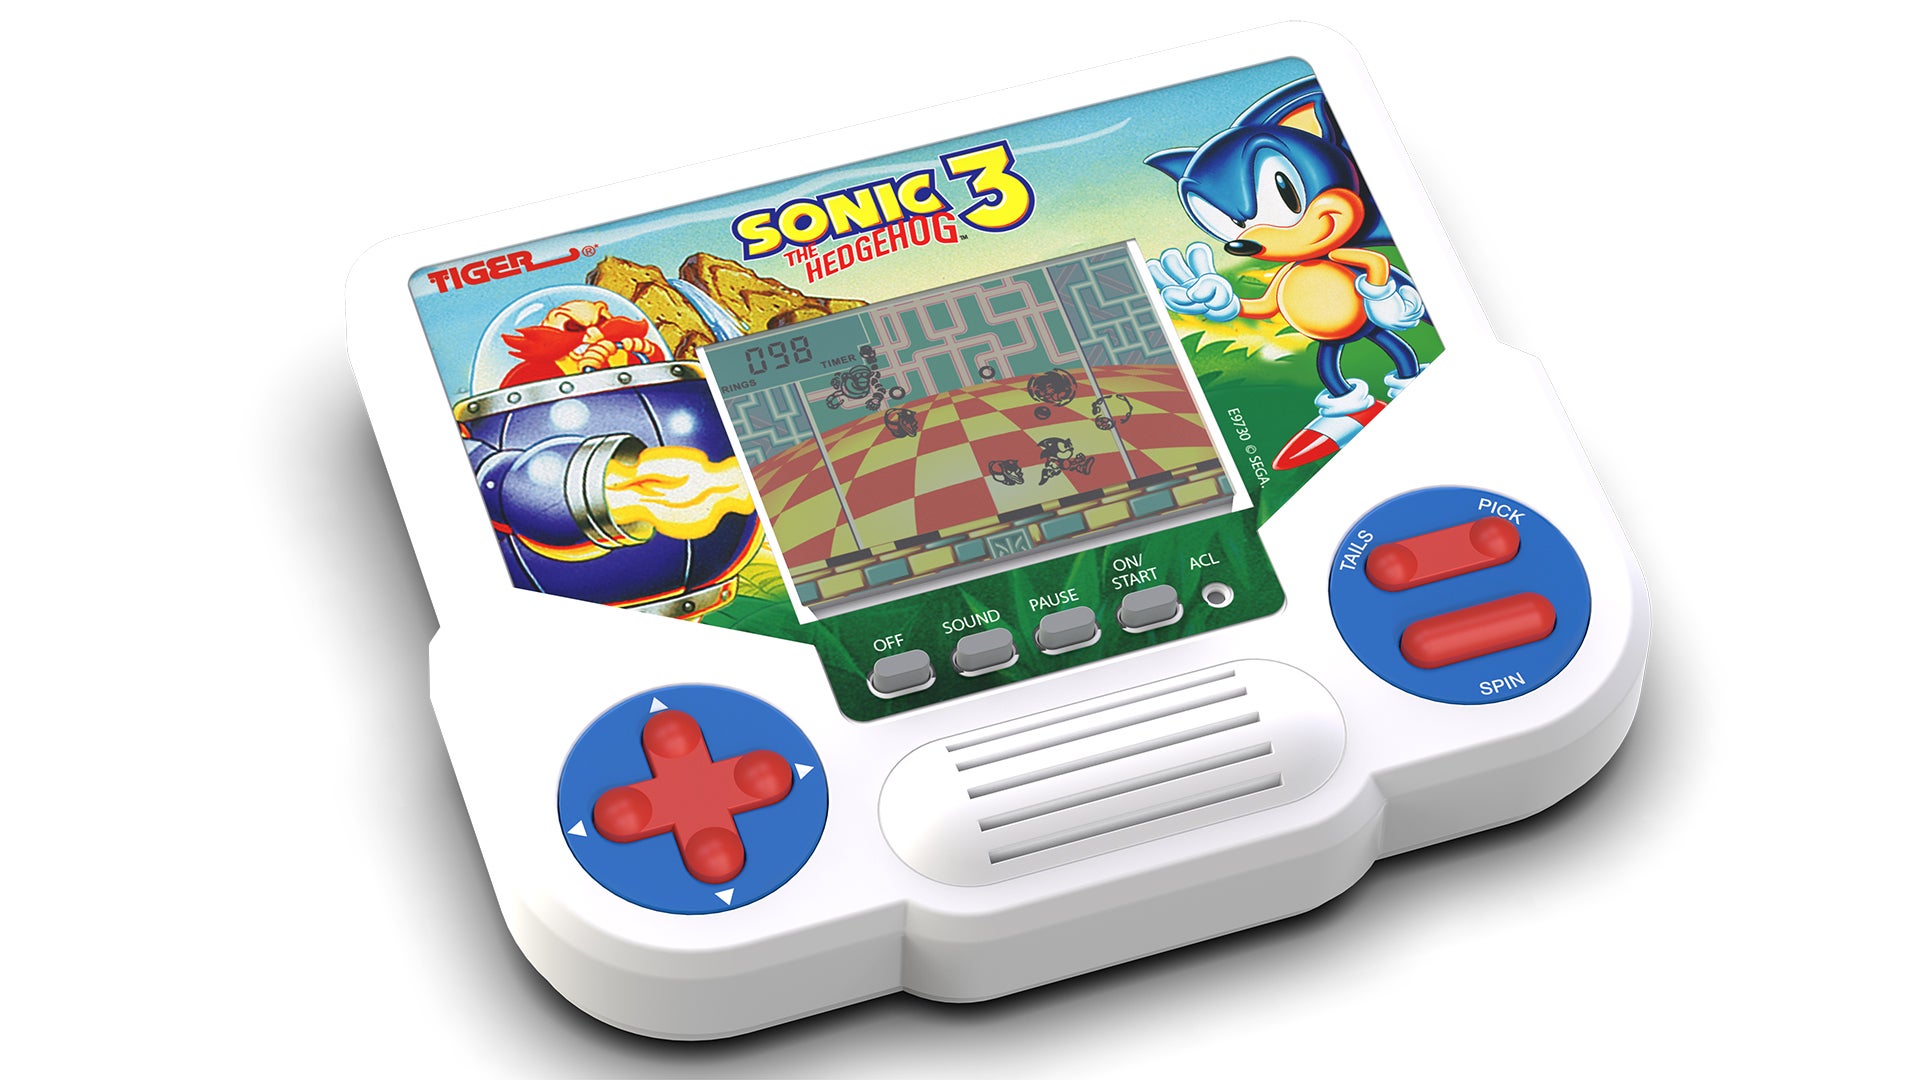 Those Cheap-Arse Tiger LCD Handheld Games Are Back